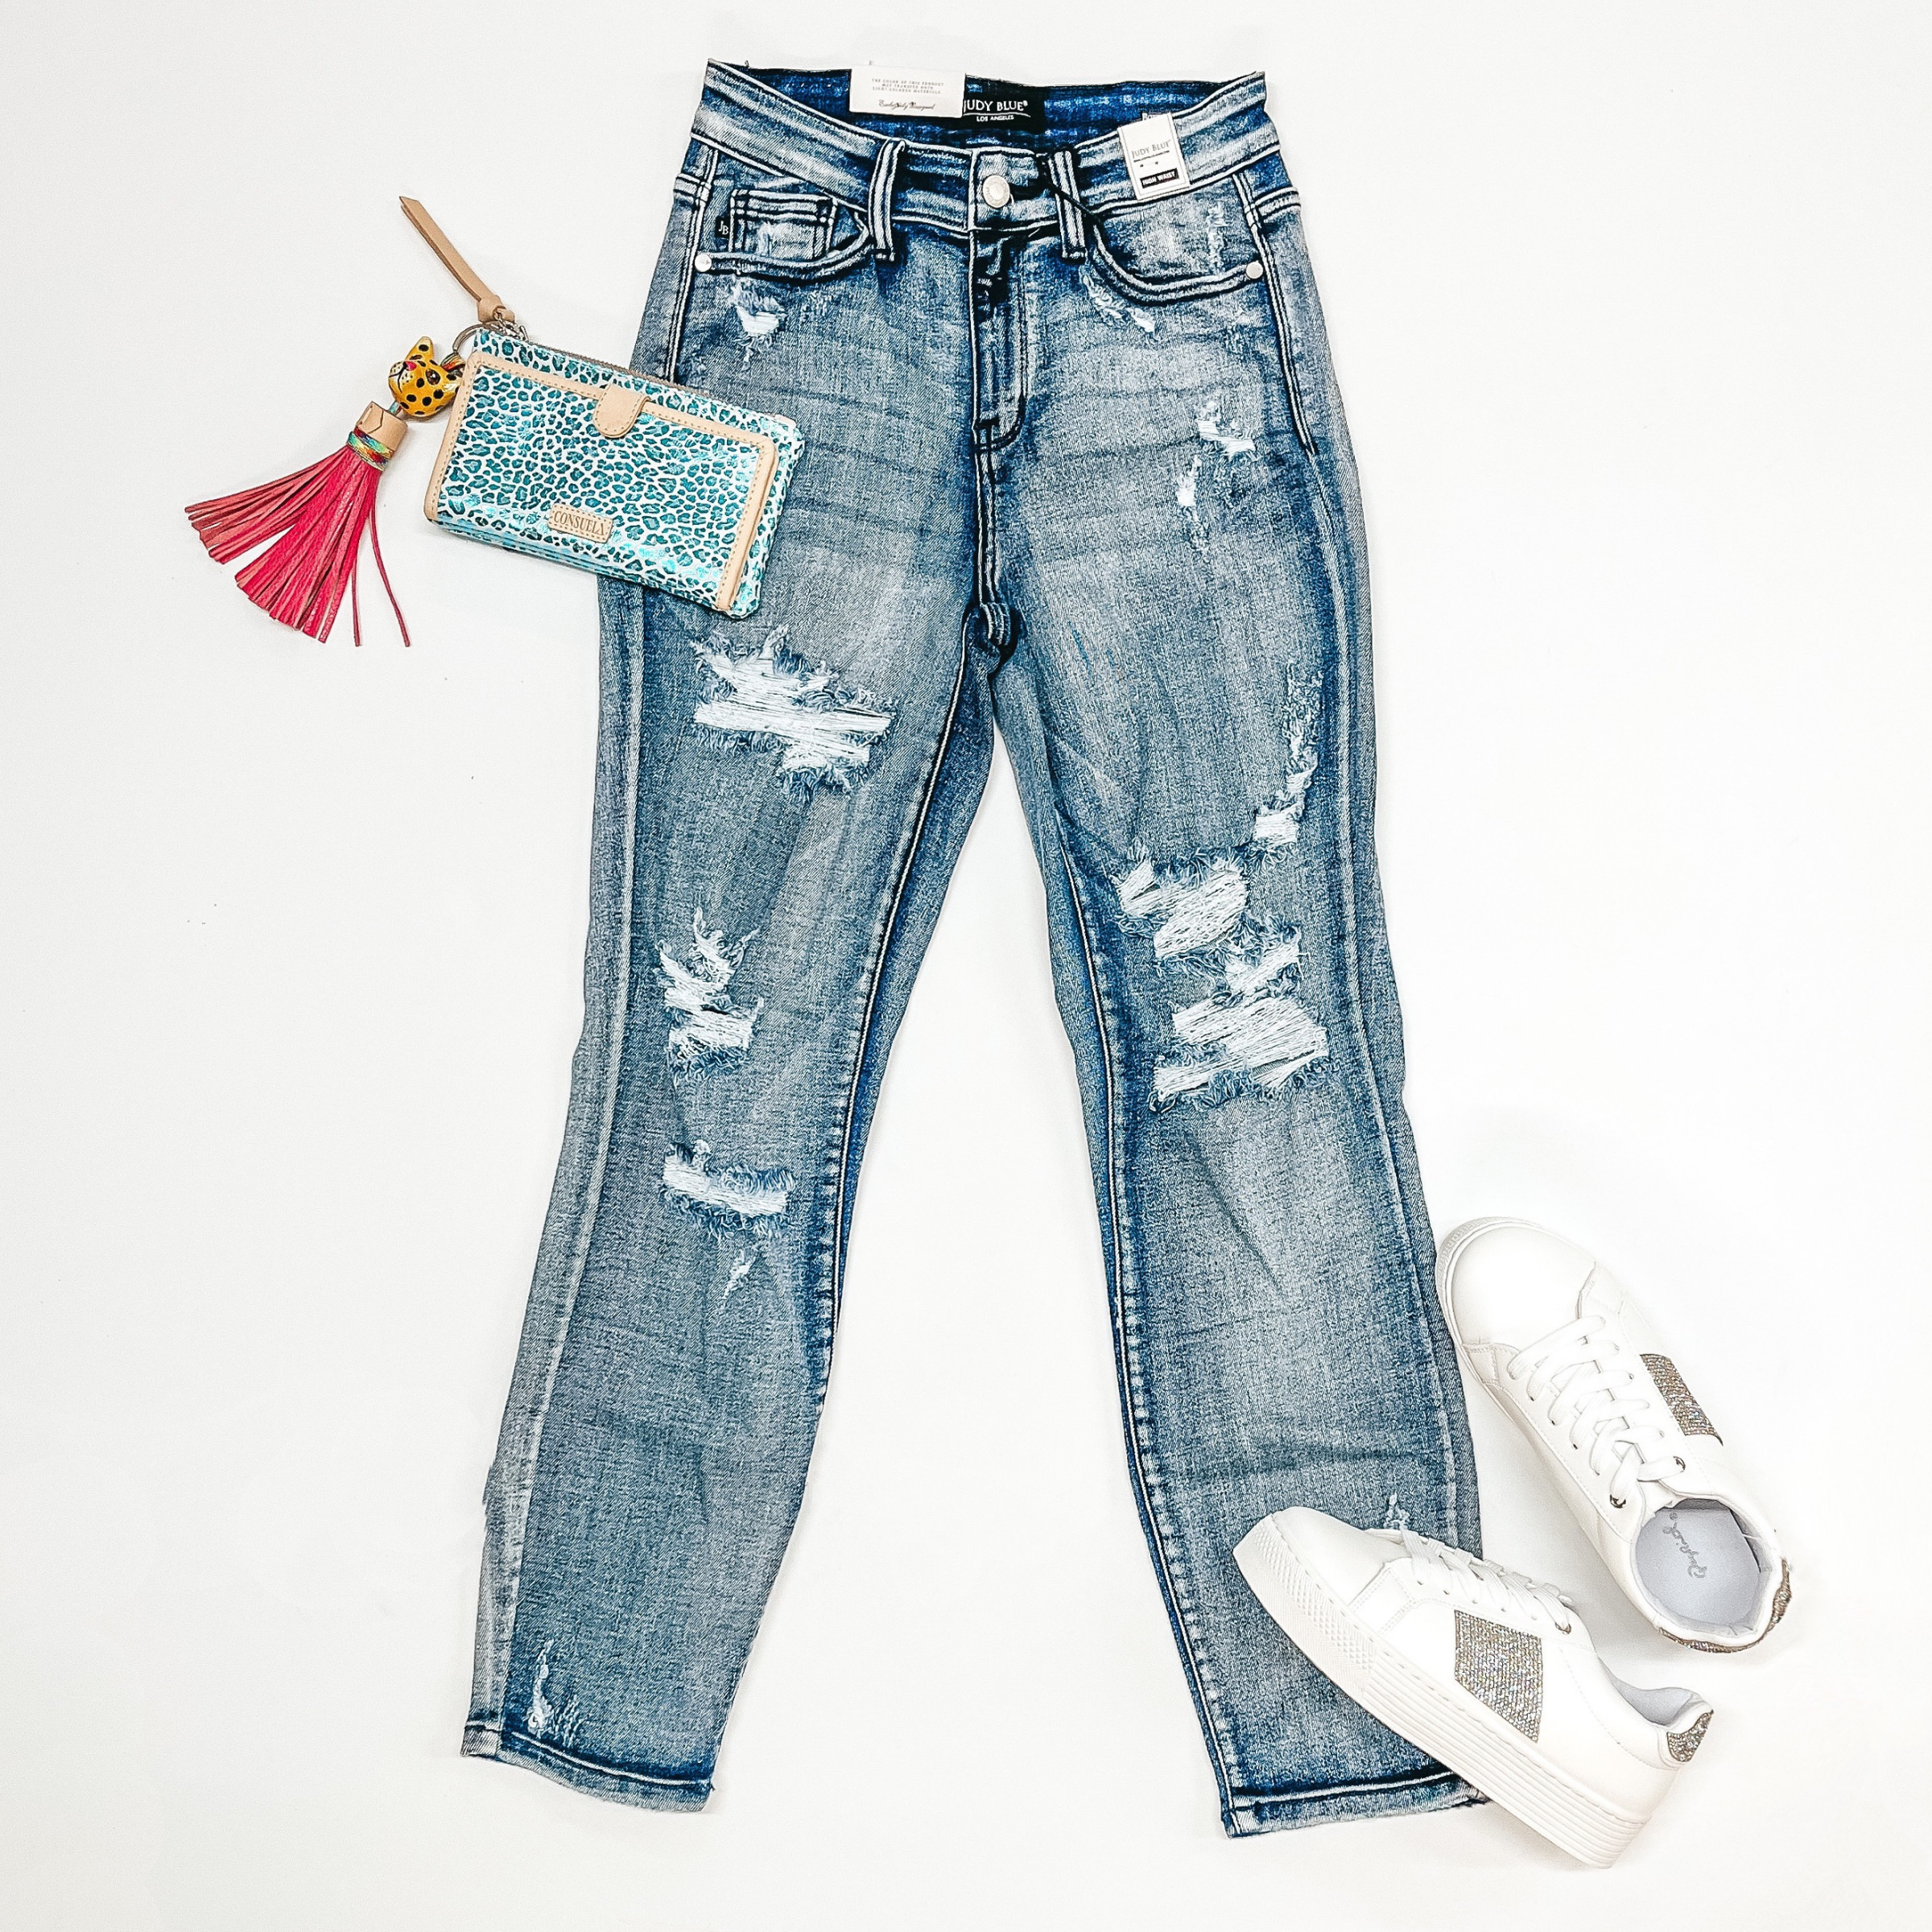 A pair of distressed boyfriend jeans in light wash. Pictured on a white background with white sneakers, a leopard print wallet and keychain.